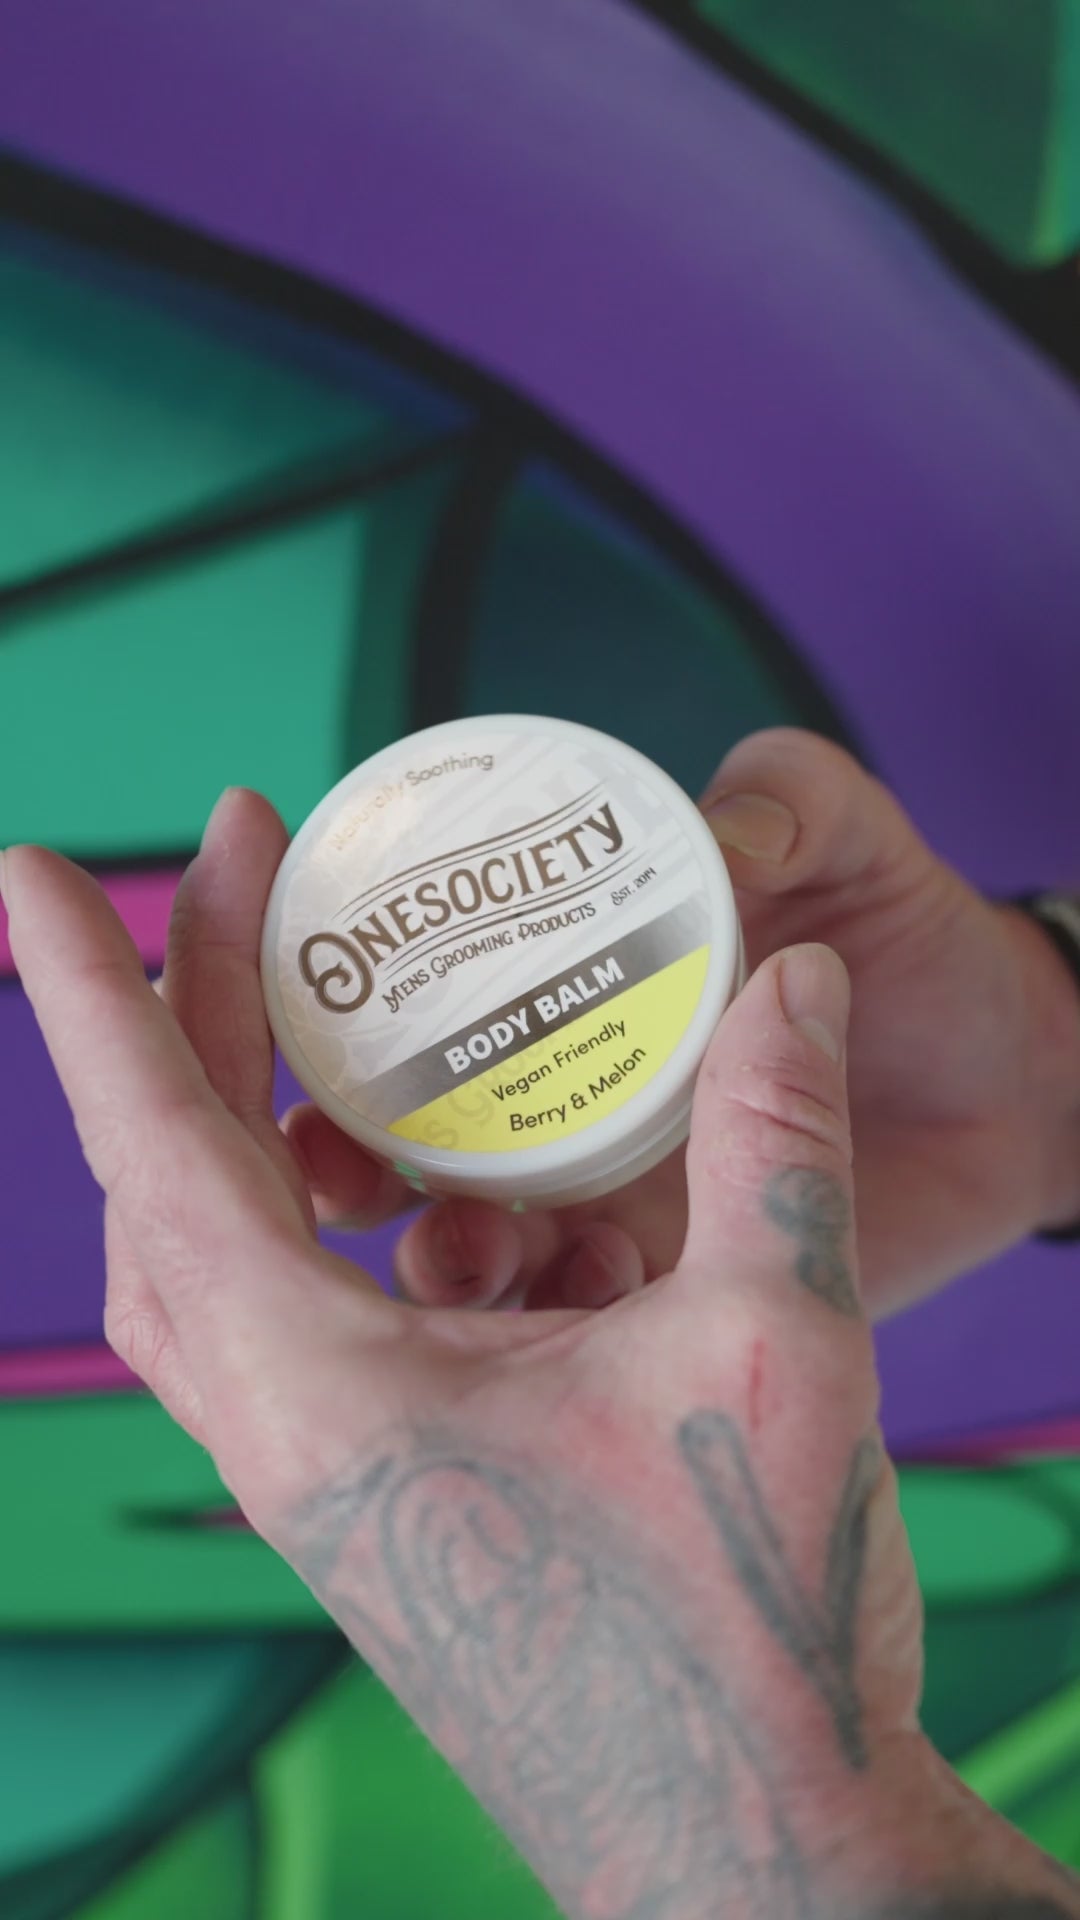 One Society Body Balm Vegan Friendly. Onesociety Men's Tattoo Aftercare Body Butter.